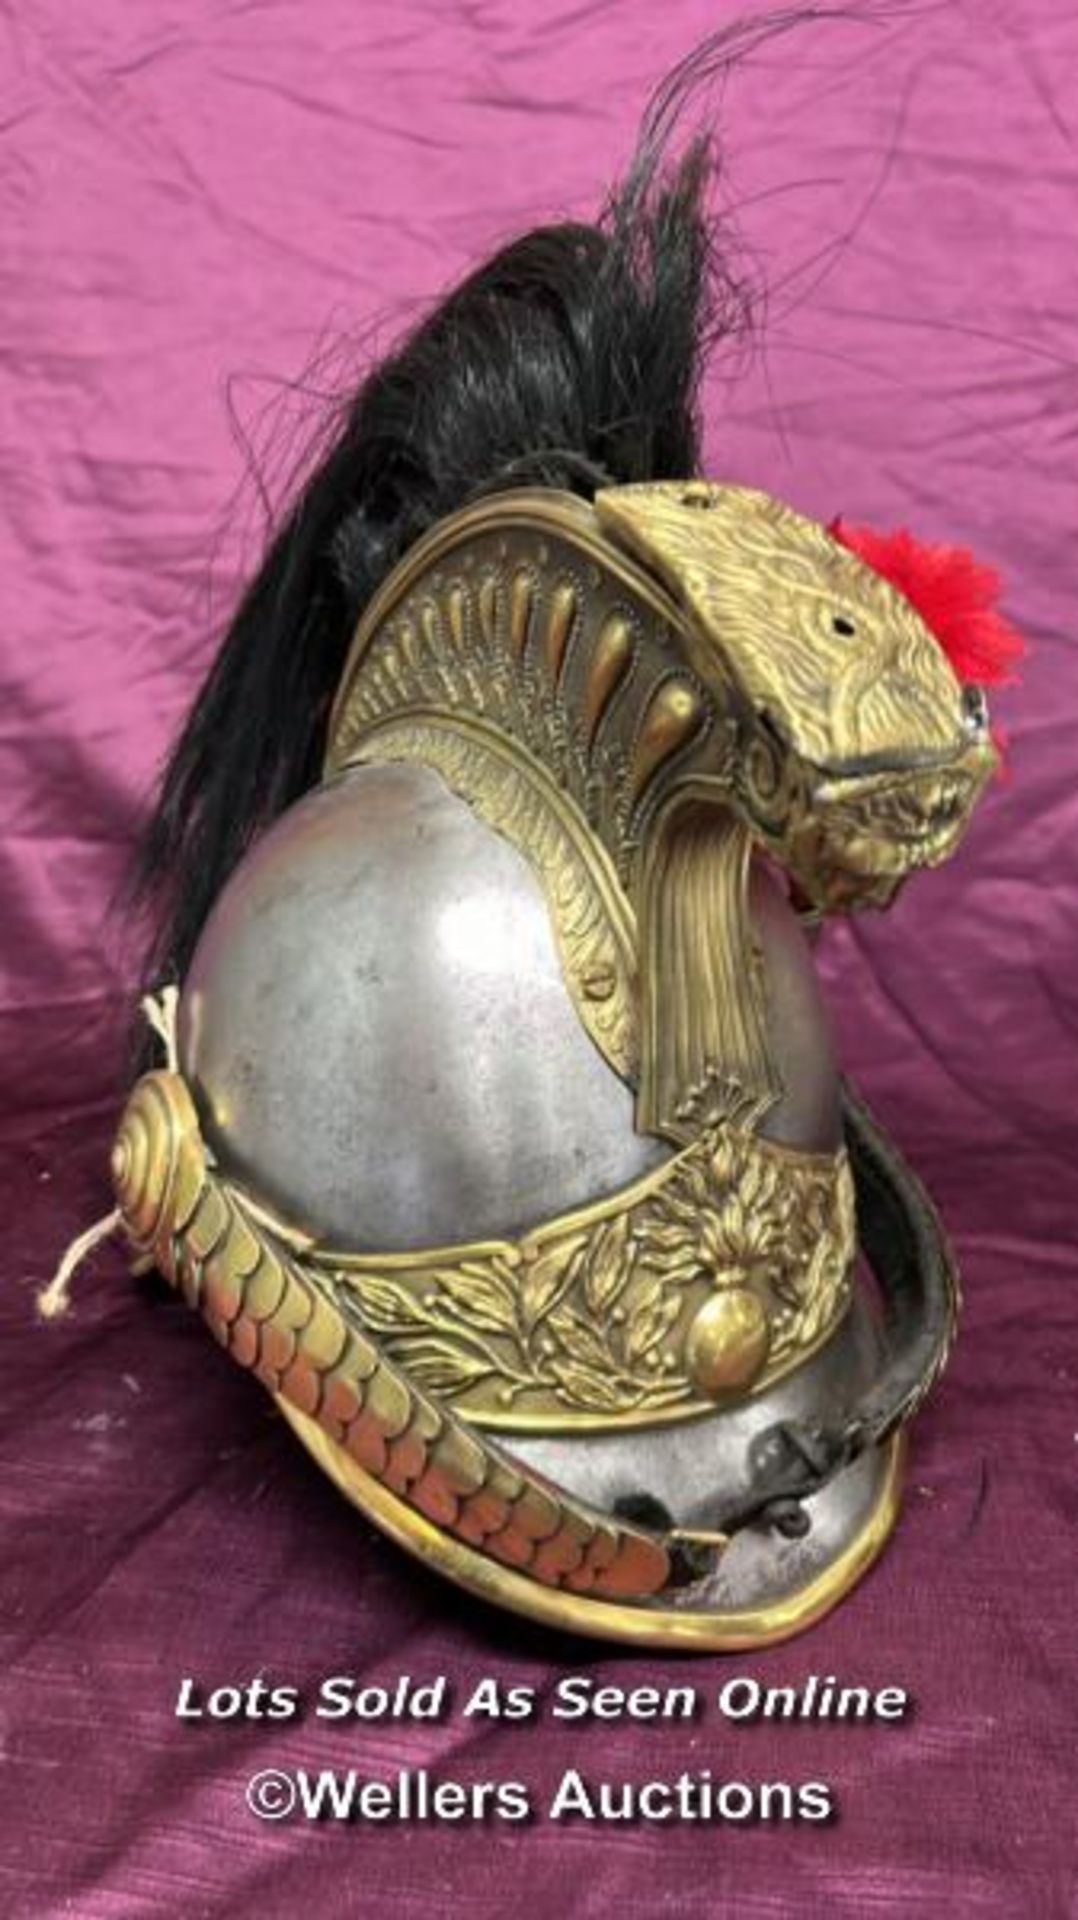 CIRCA 1870'S FRENCH CUIRASSIER HELMET - Image 2 of 5